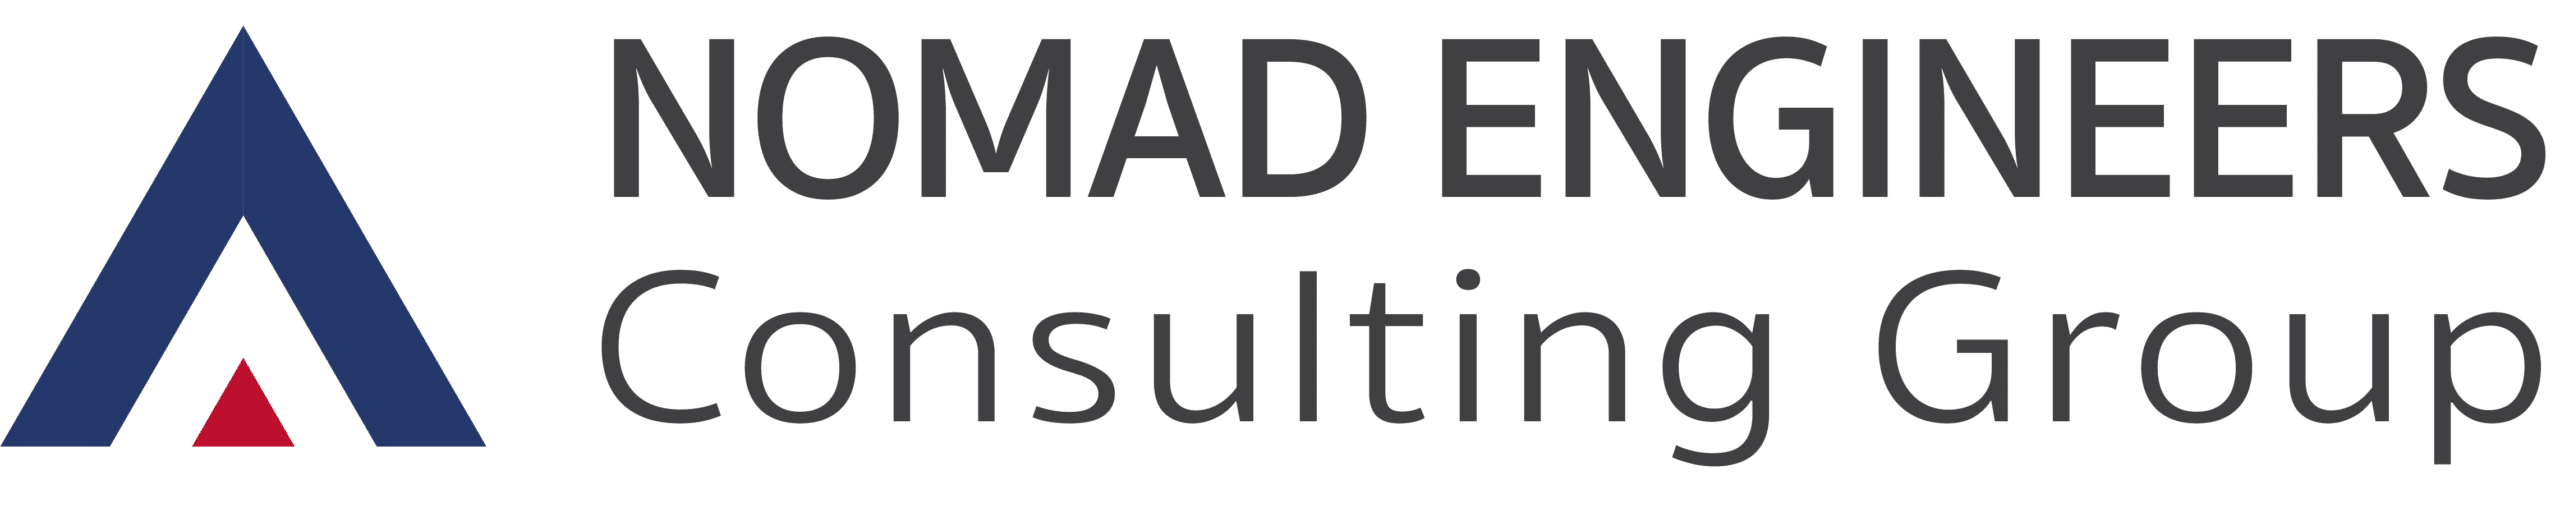 Nomad Engineers Consulting Group